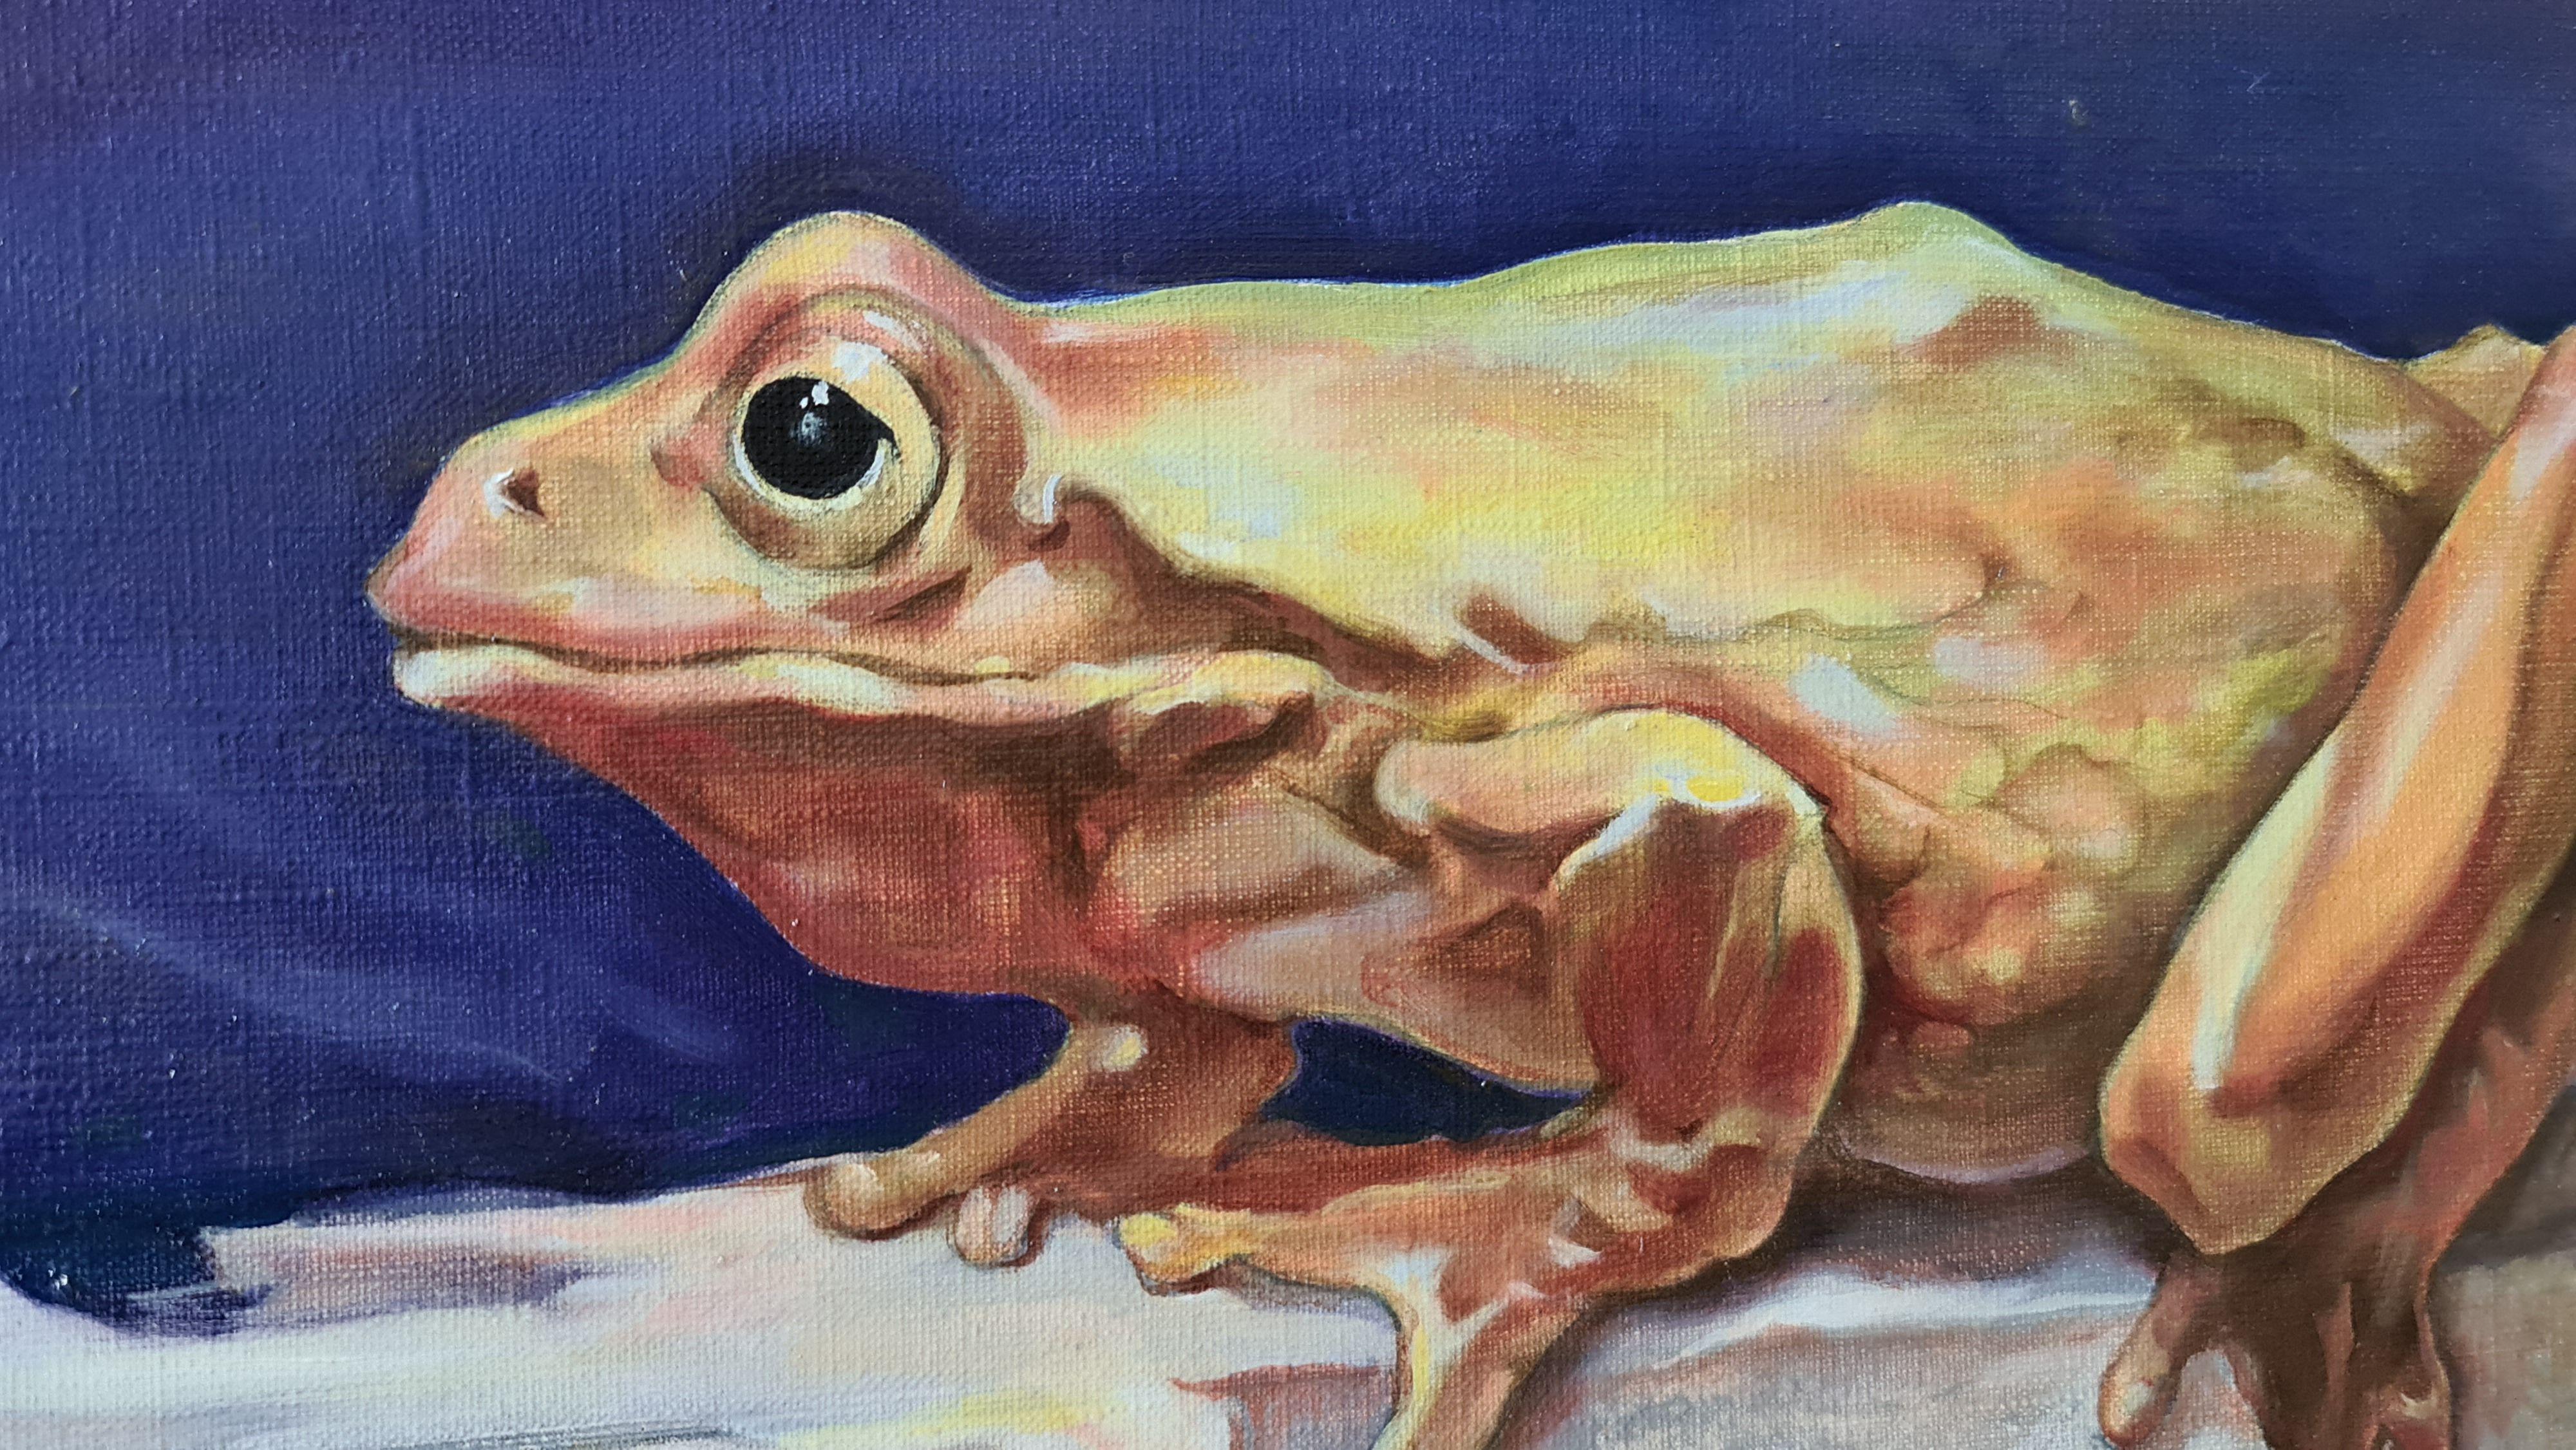 Frog. 2013 oil on canvas, 73x100 cm - Painting by Vadim Kovalev